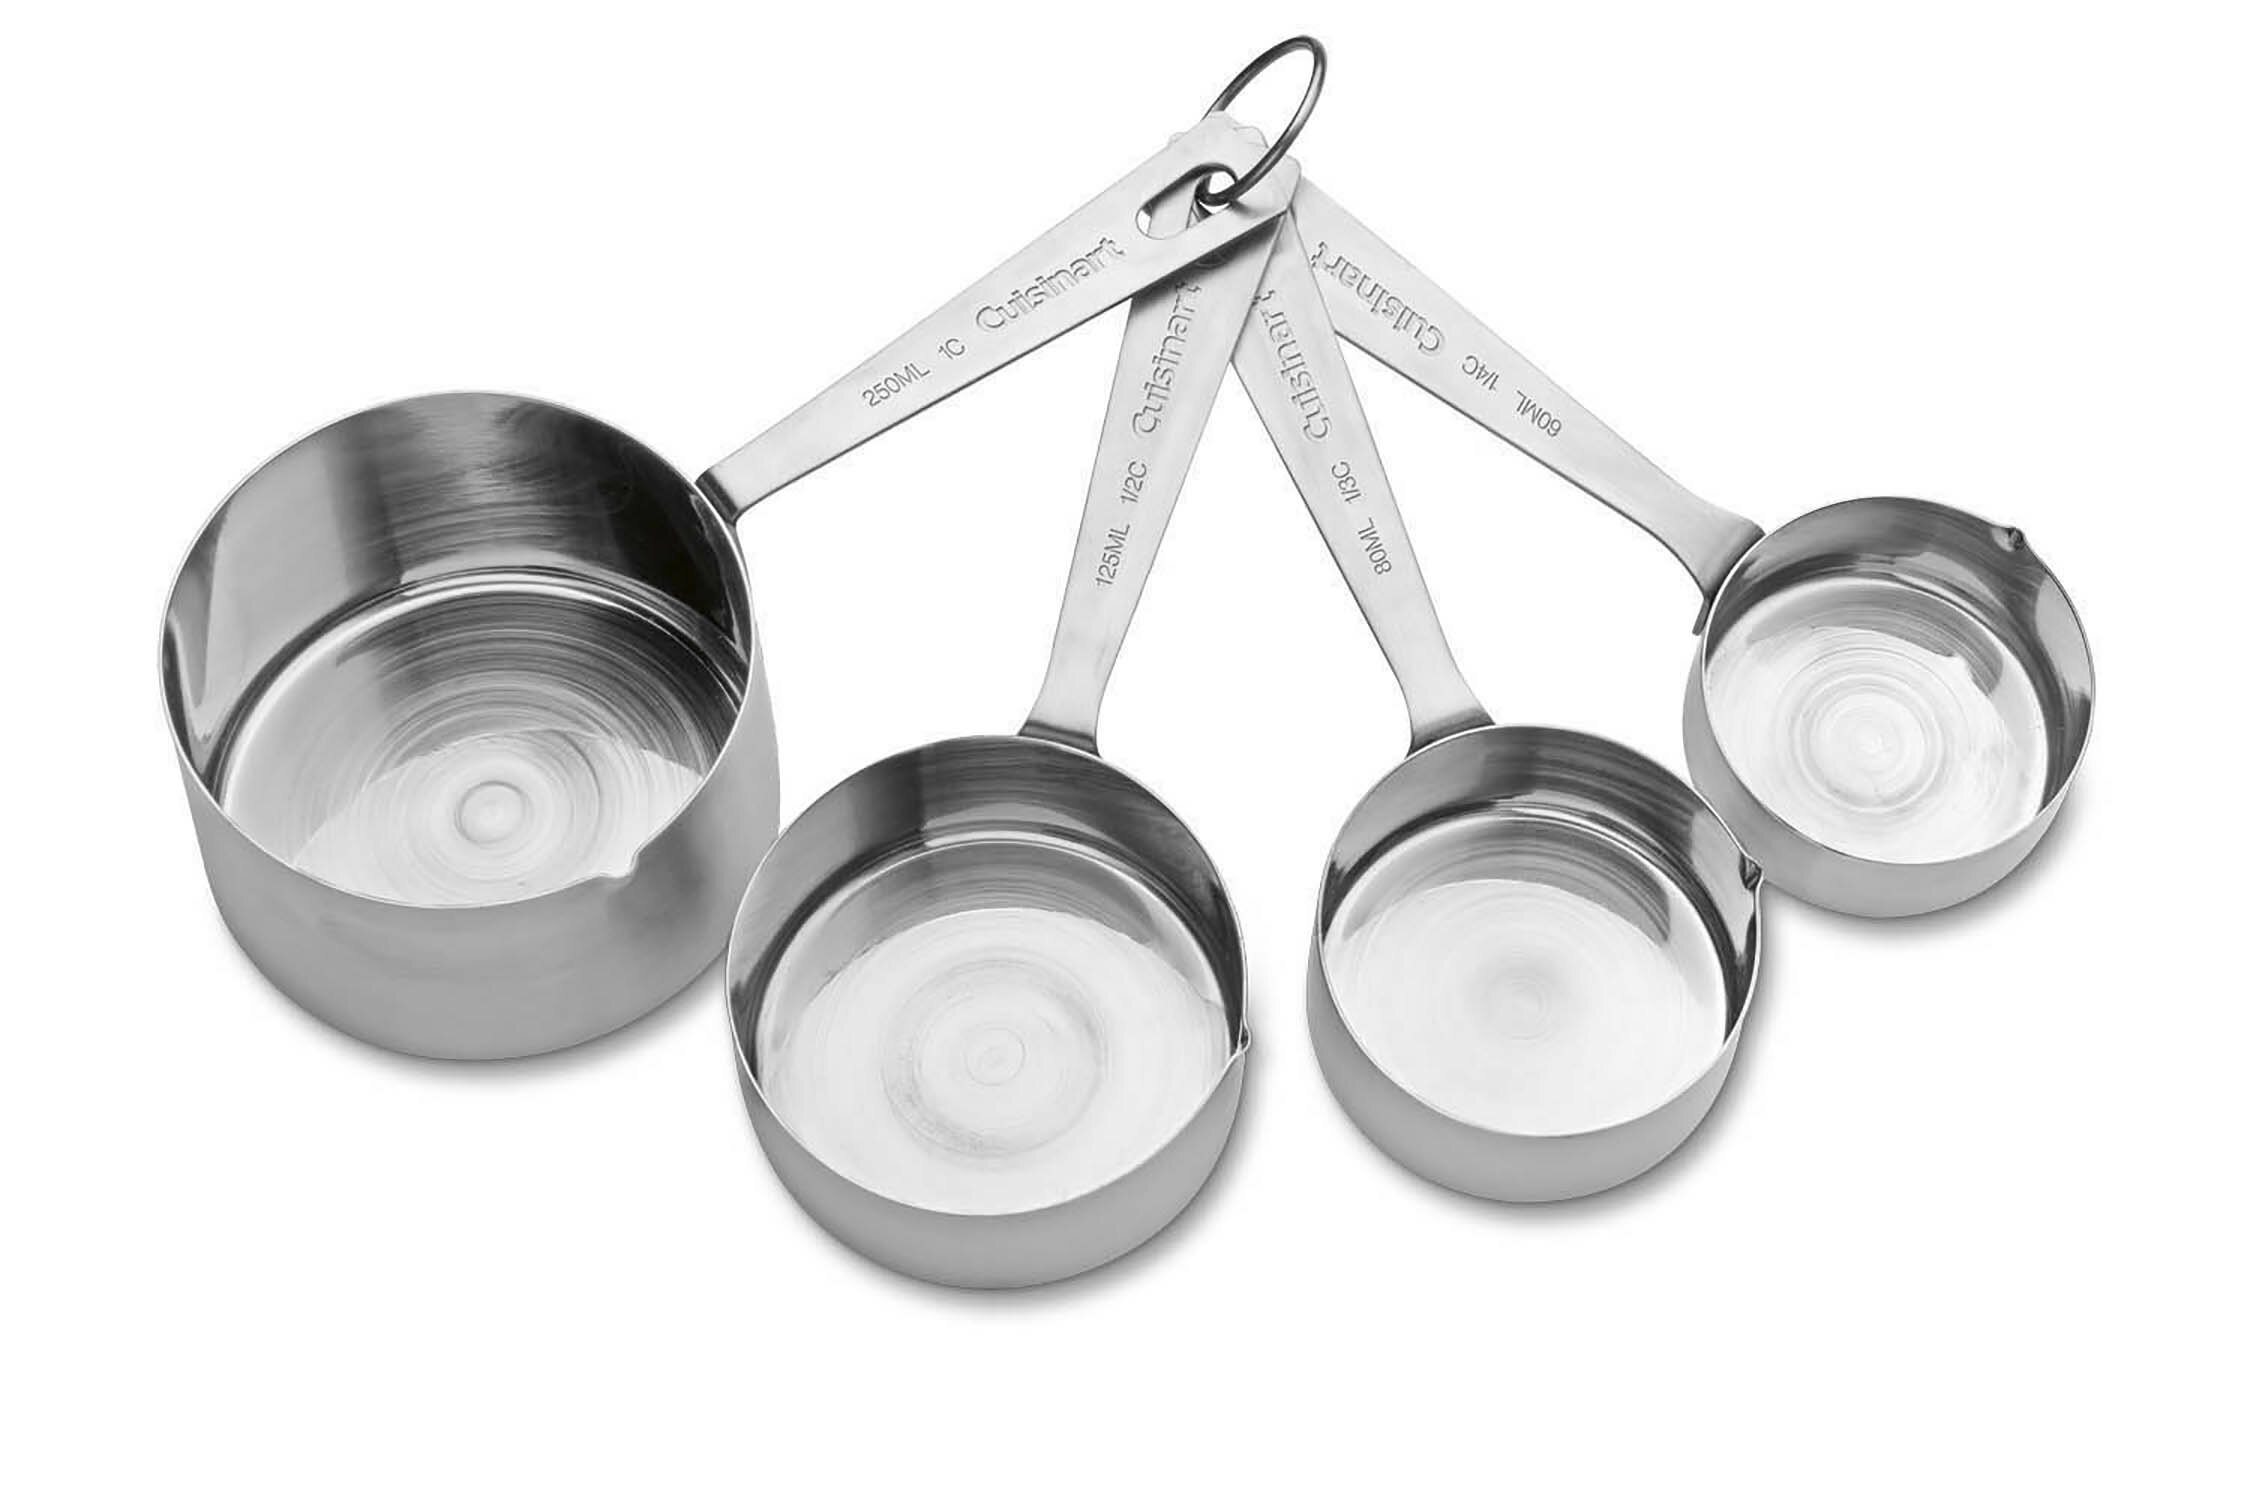 Cuisinart 4pc Stainless Steel Magnetic Measuring Cup Set Black